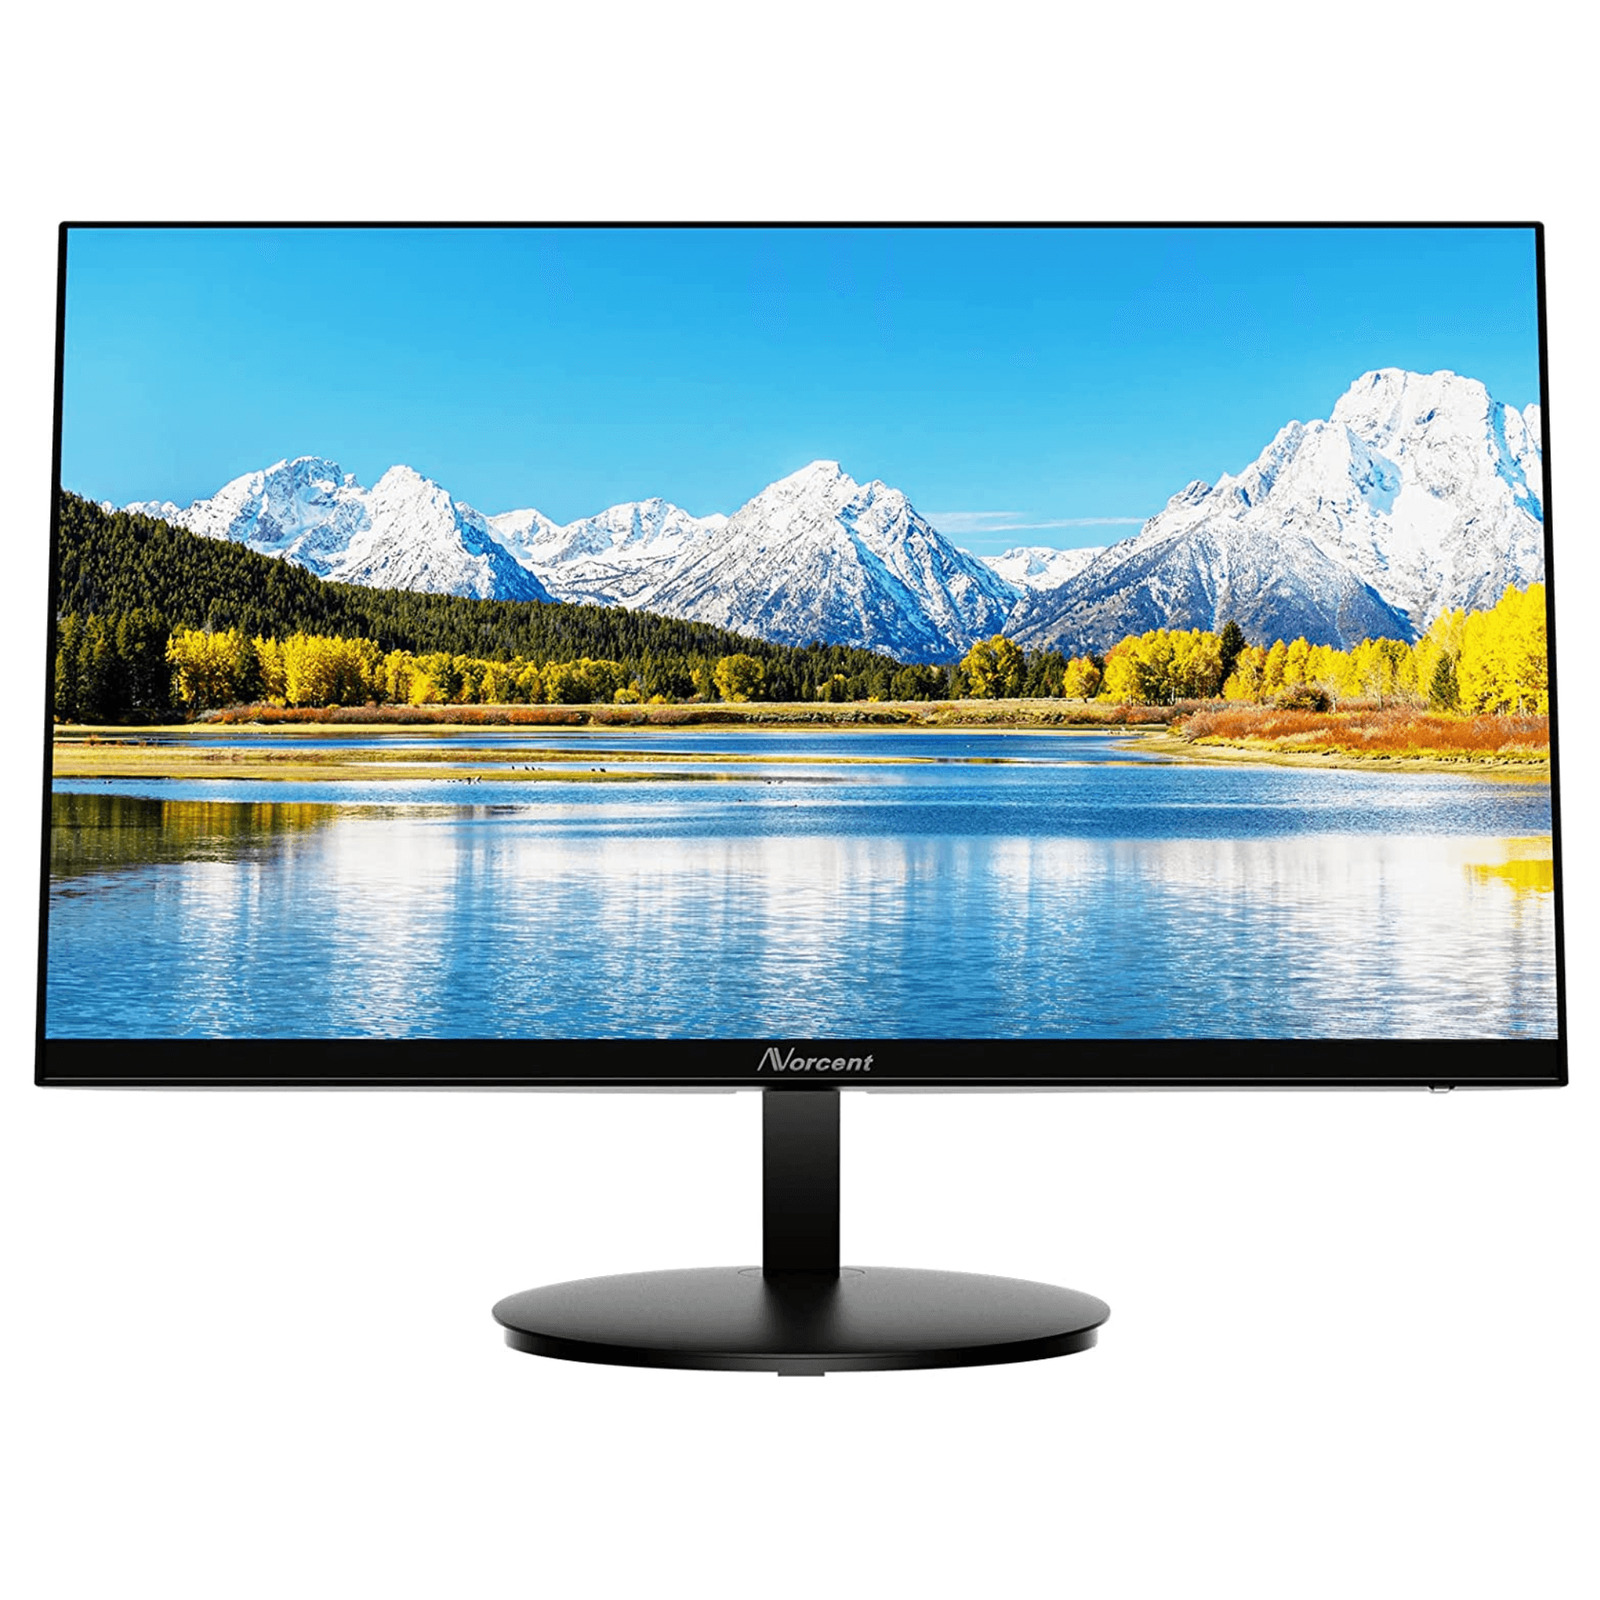 Norcent 24 Inch Frameless Computer Monitor FHD 75HZ VA with Multiple Interfaces